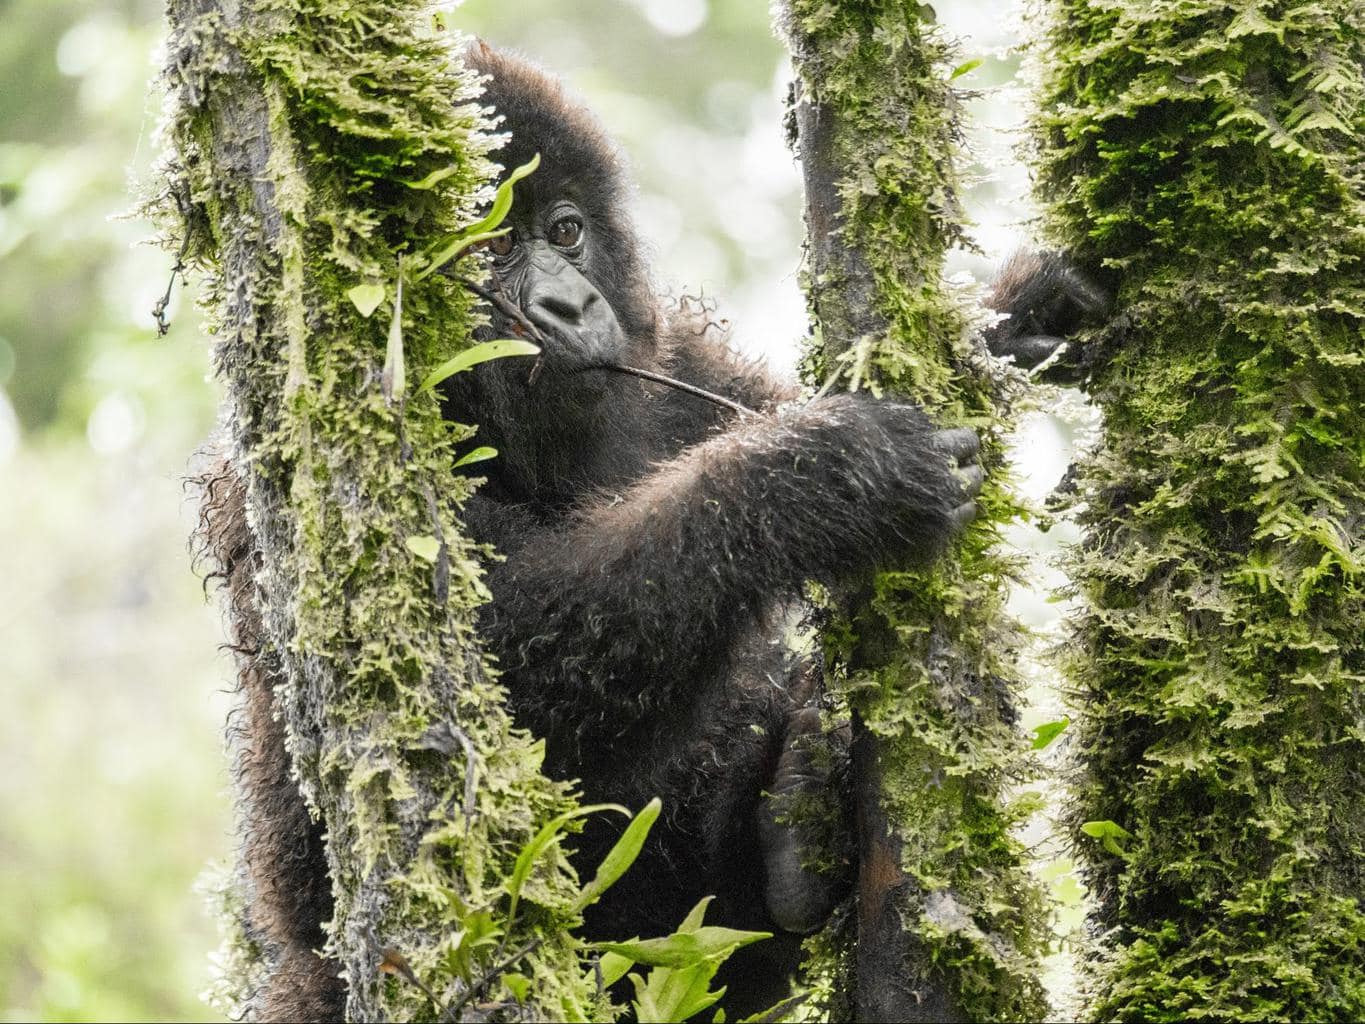 A young mountain gorilla playing in the trees